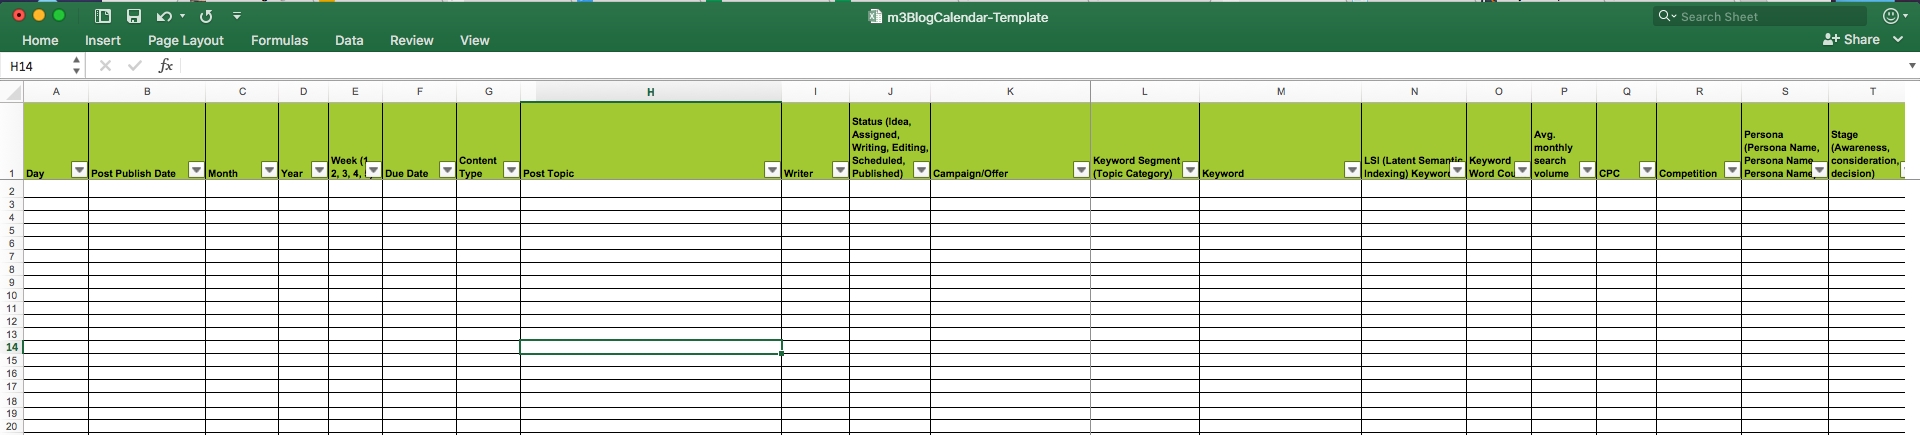 Editorial Calendar Templates For Content Marketing: The Ultimate List in Social Media Content Plan Excel Template Free